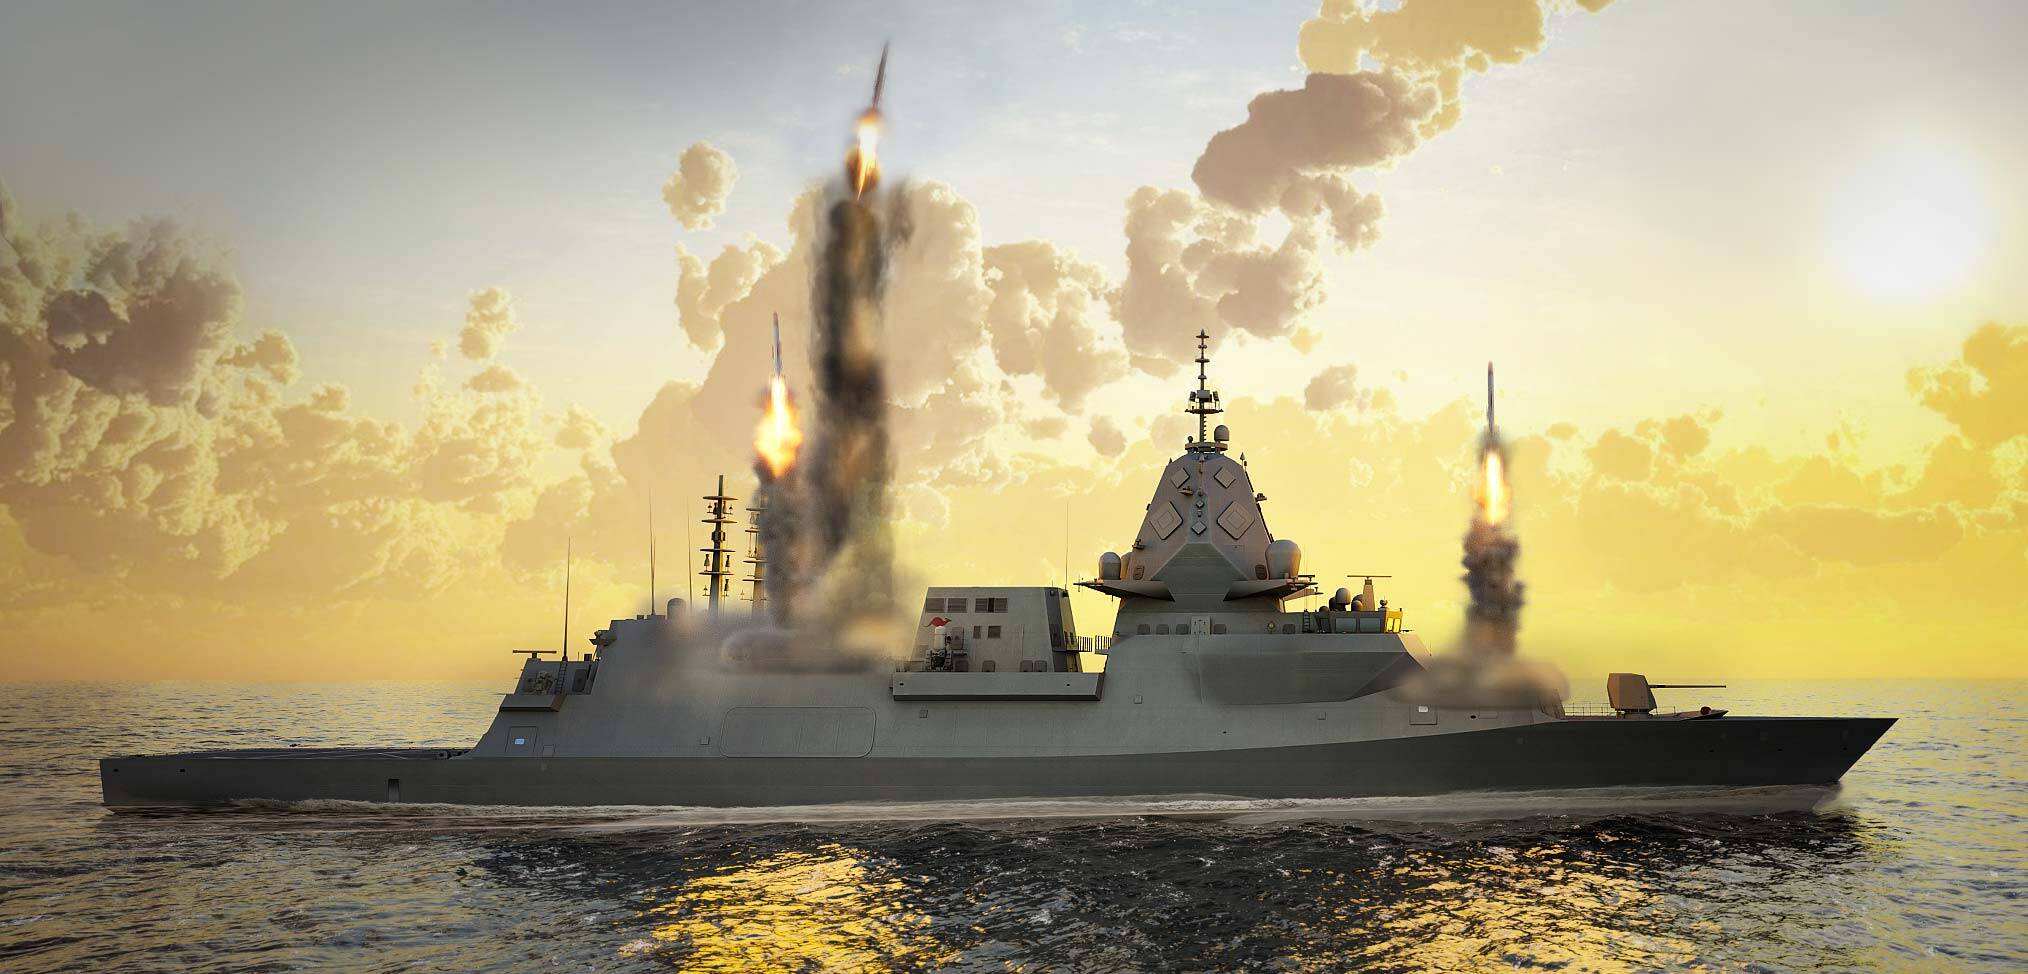 Adding firepower to the Type 26 Frigate